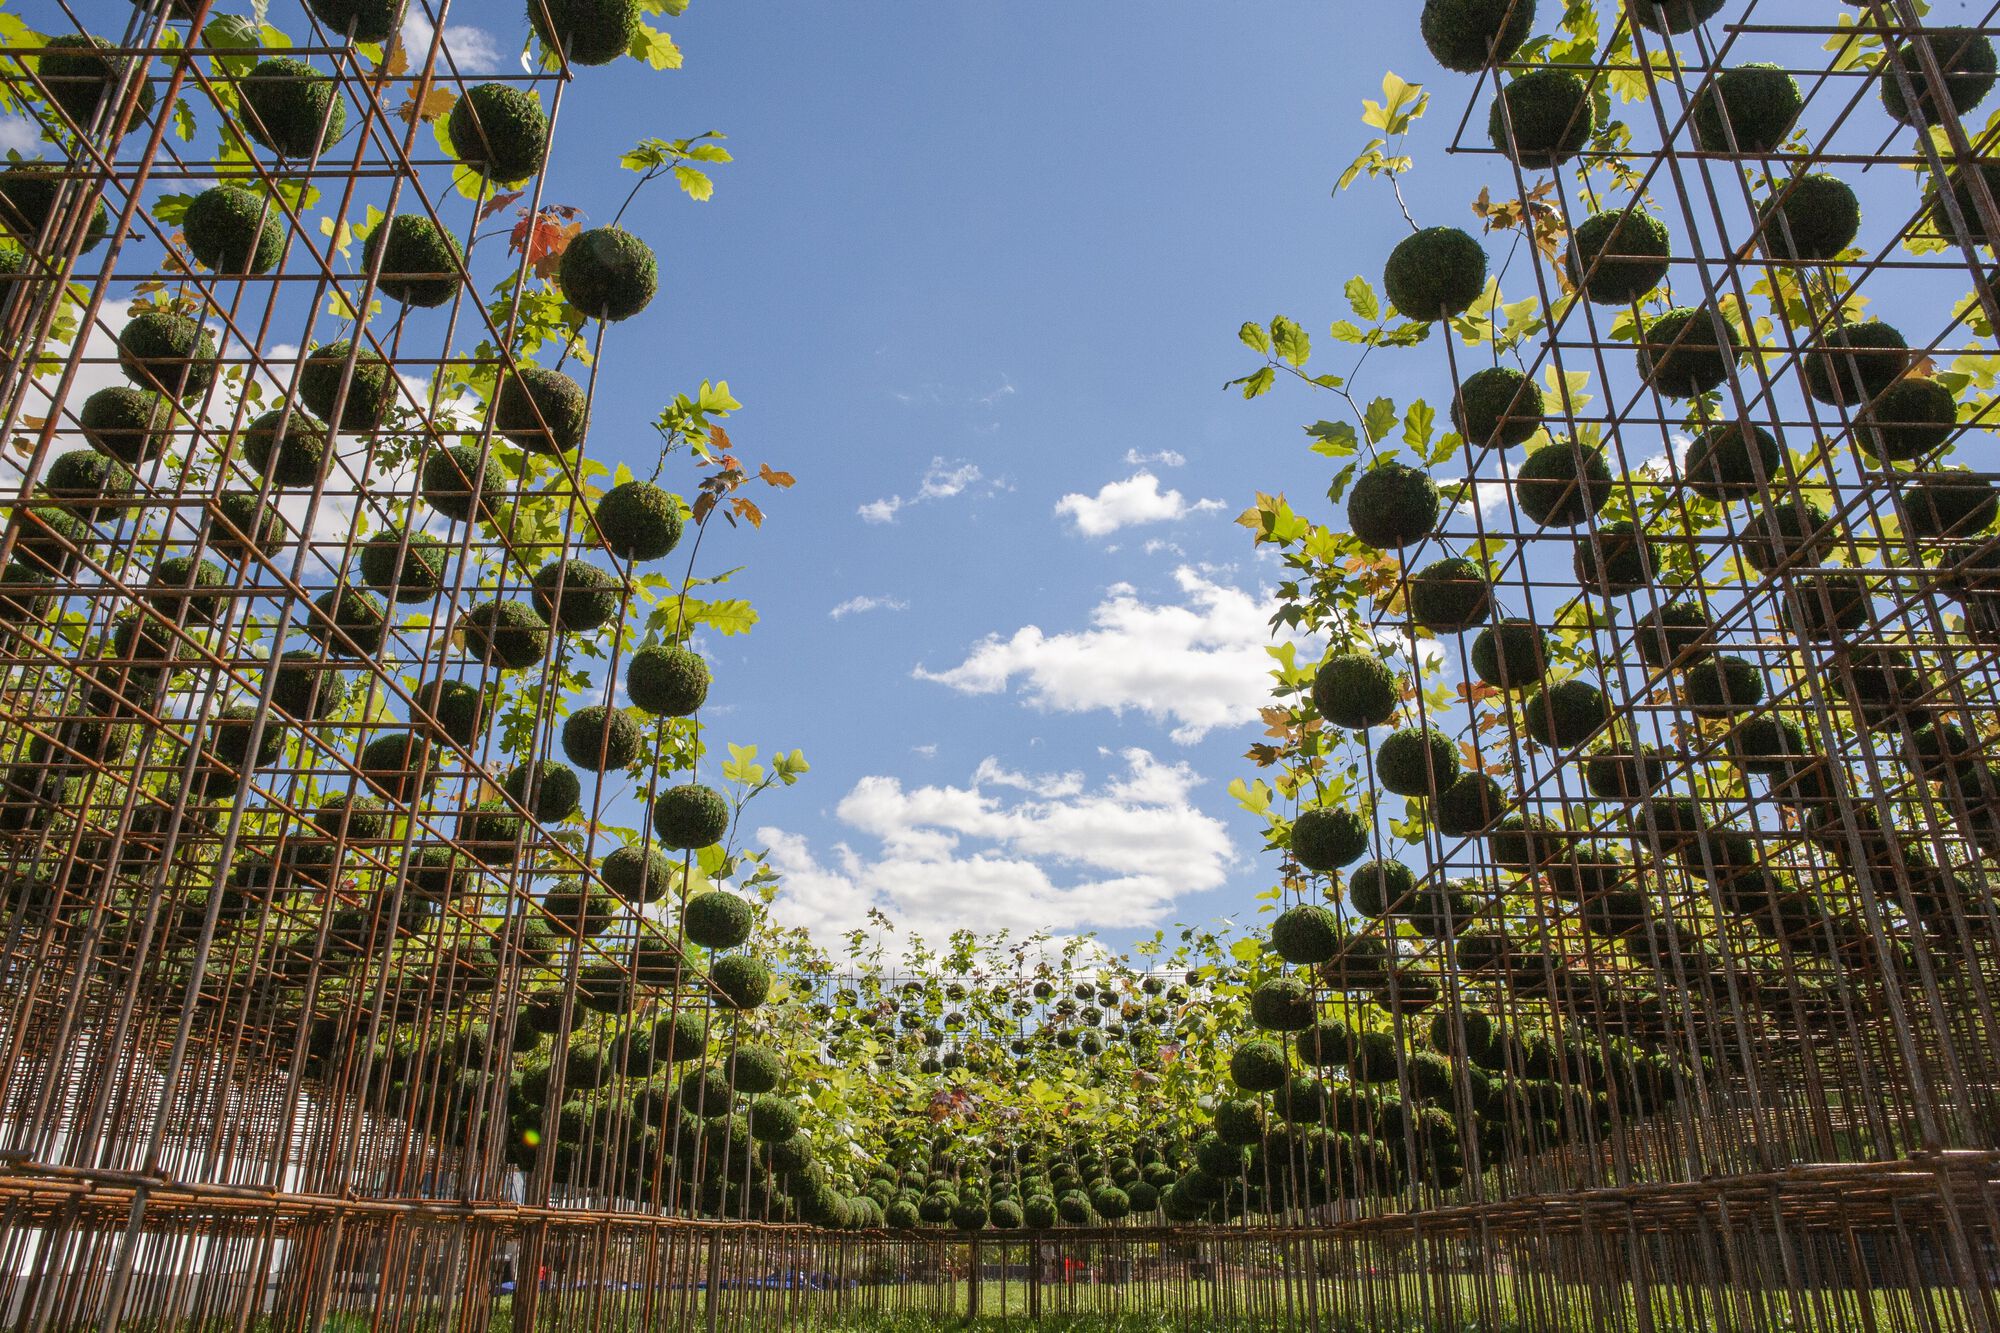 The metal structure is 2.2m high to accommodate hundreds of Kokedama that form an inverted dome